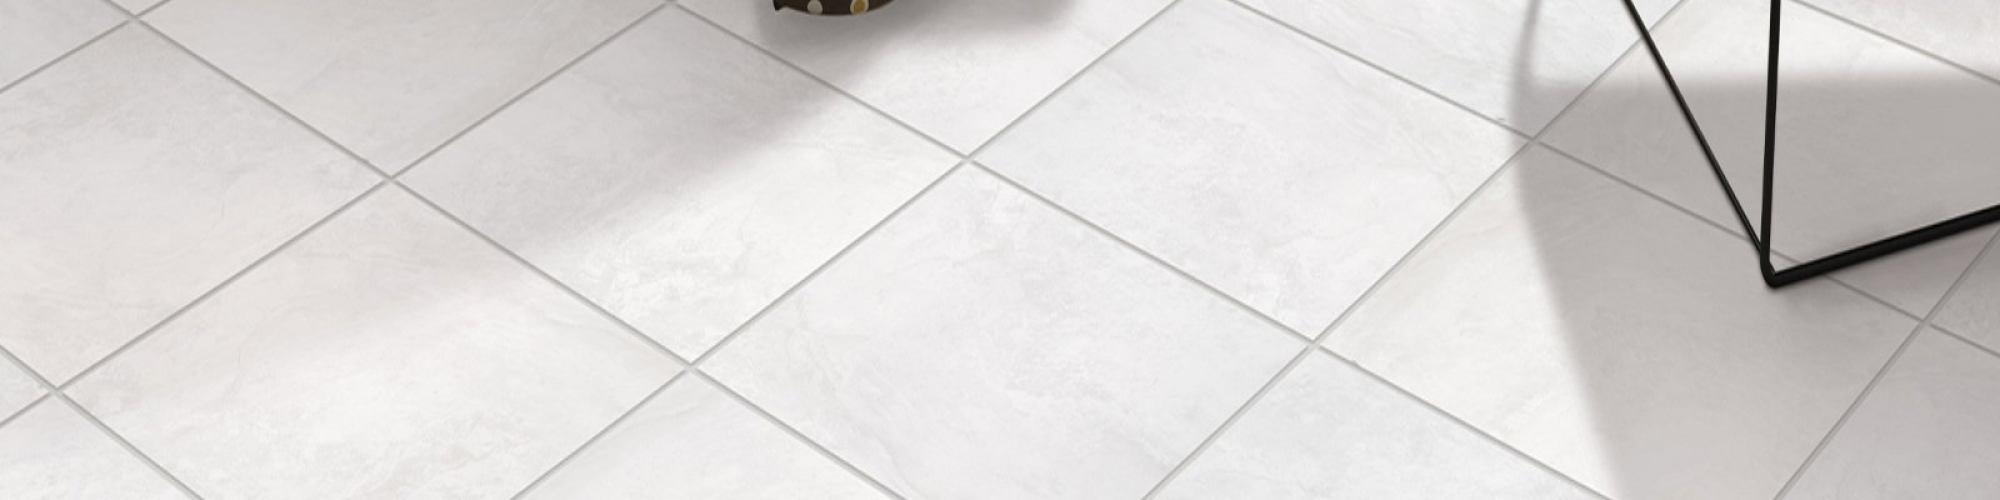 Quality tile info provided by Heritage Floor Coverings in the North Royalton, OH area